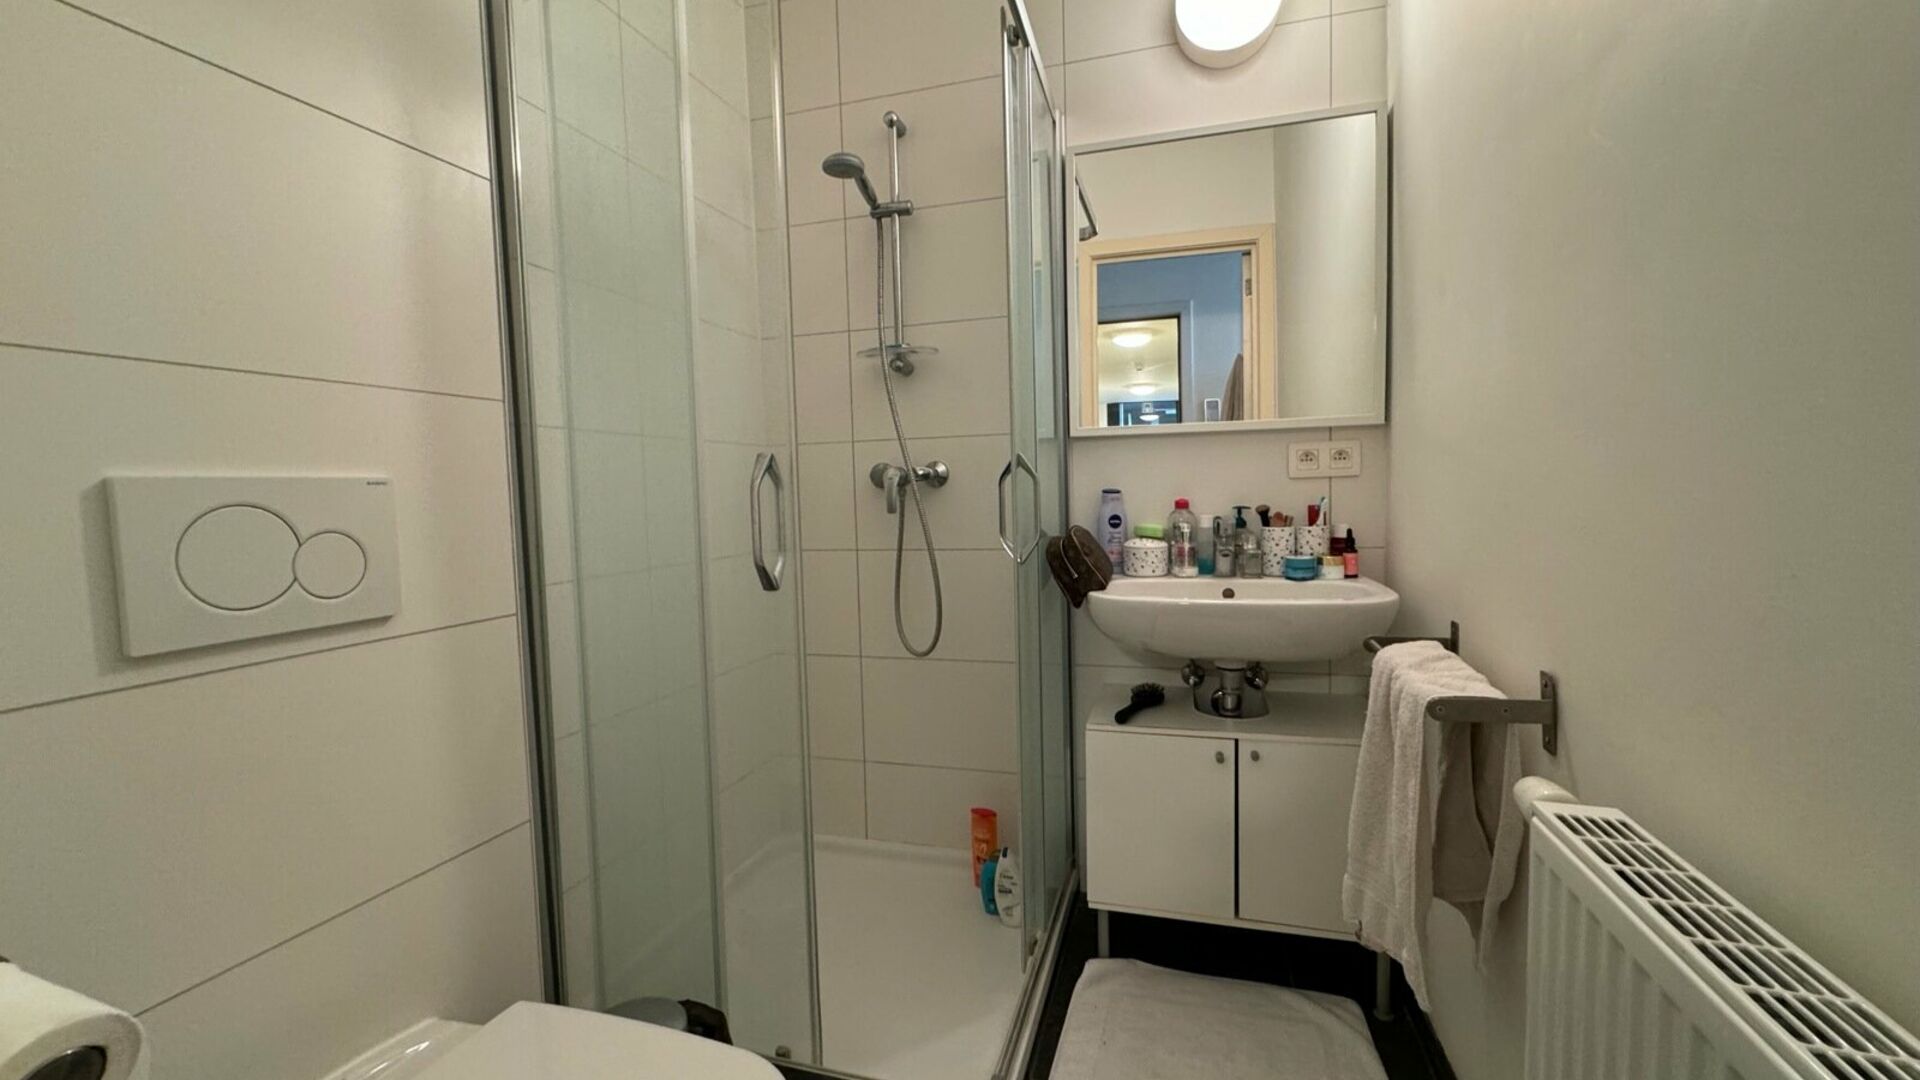 Luxurious studio, of no less than 28 m² and with its own private terrace of 23m² in the heart of Leuven near Grote and Oude Markt. This room is located on the ground floor at the back and enjoys a beautiful view over the garden. The studio has its own b